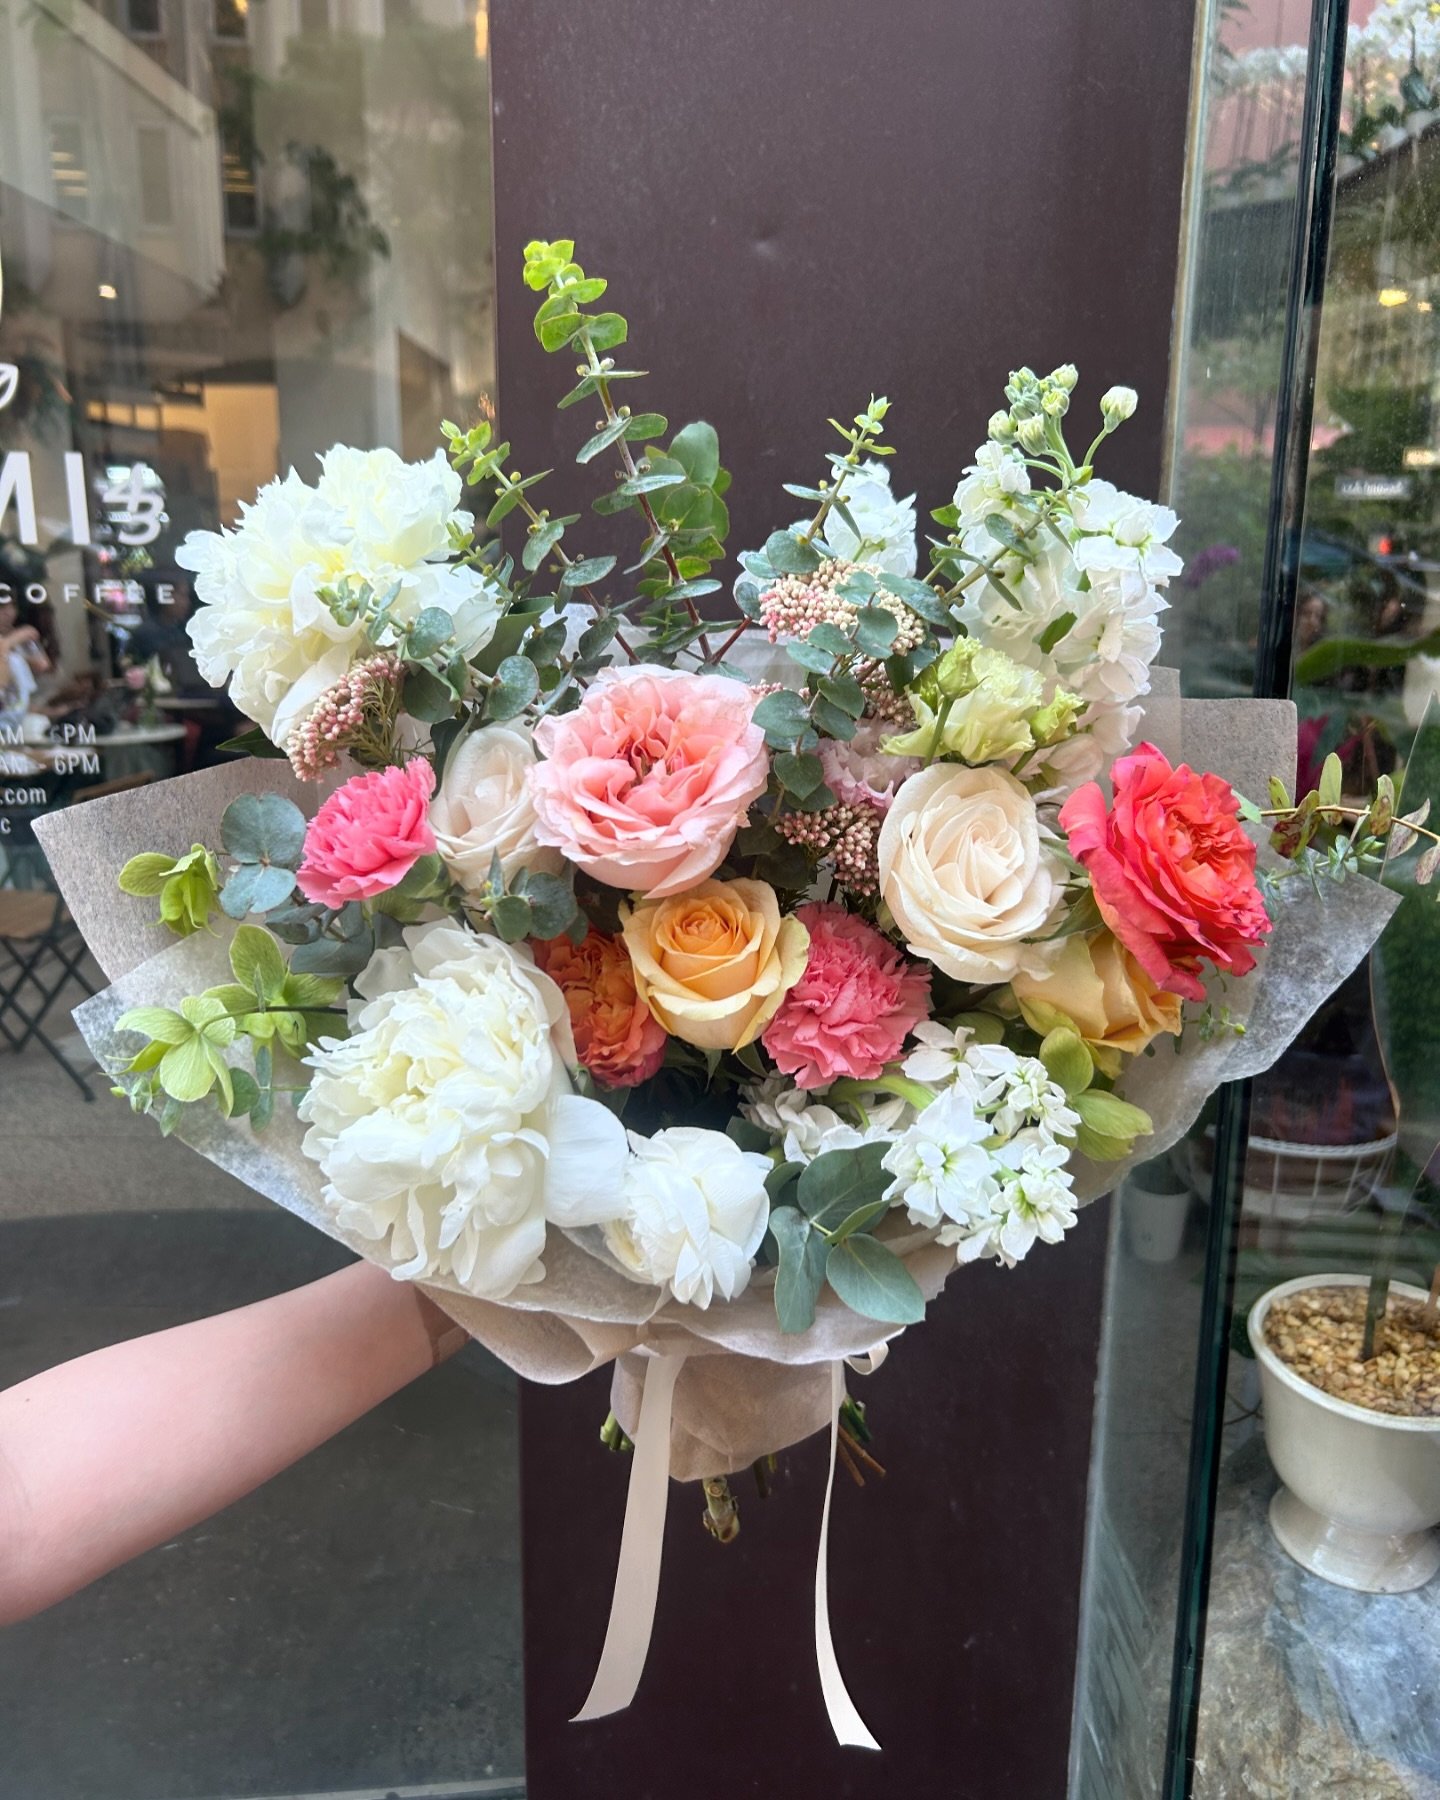 &ldquo;Love you, Mom.&rdquo;
.
.
.
#happymothersday #mothersdaybouquet #nycdelivery #remi43flowerandcoffee